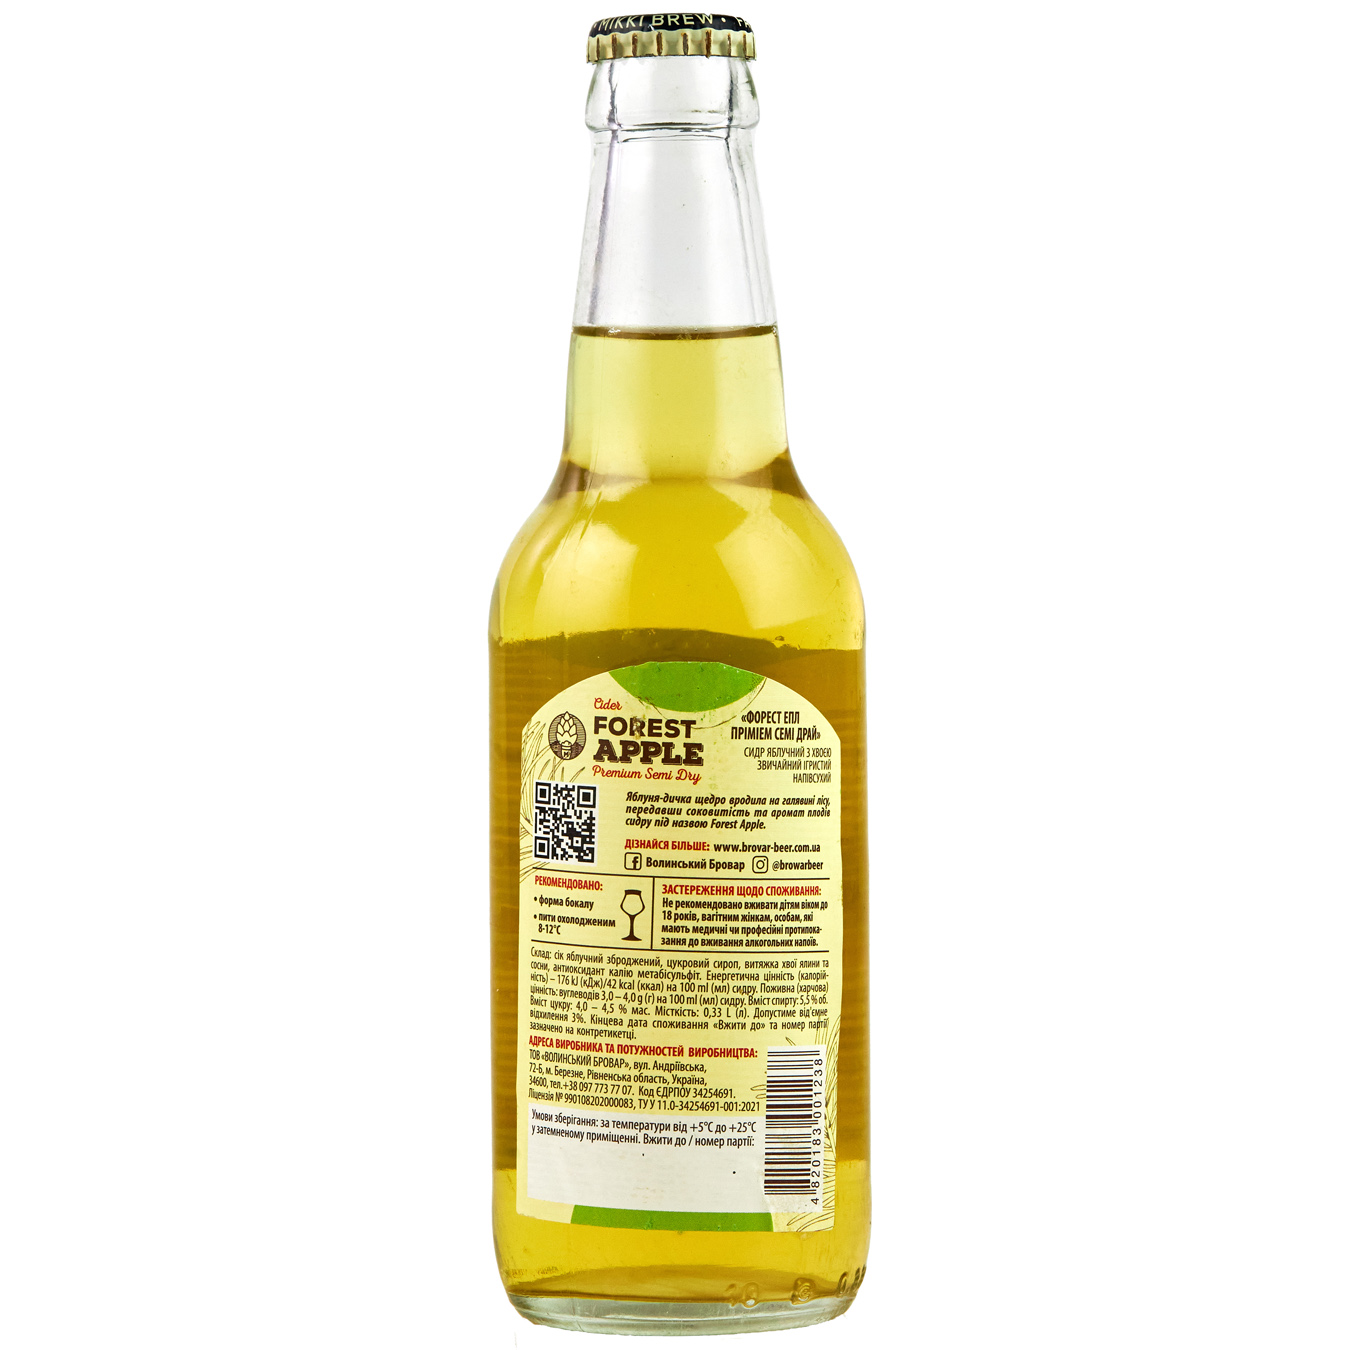 Forest Apple semi-dry Forest Apple cider 5.5% 0.33ml 2